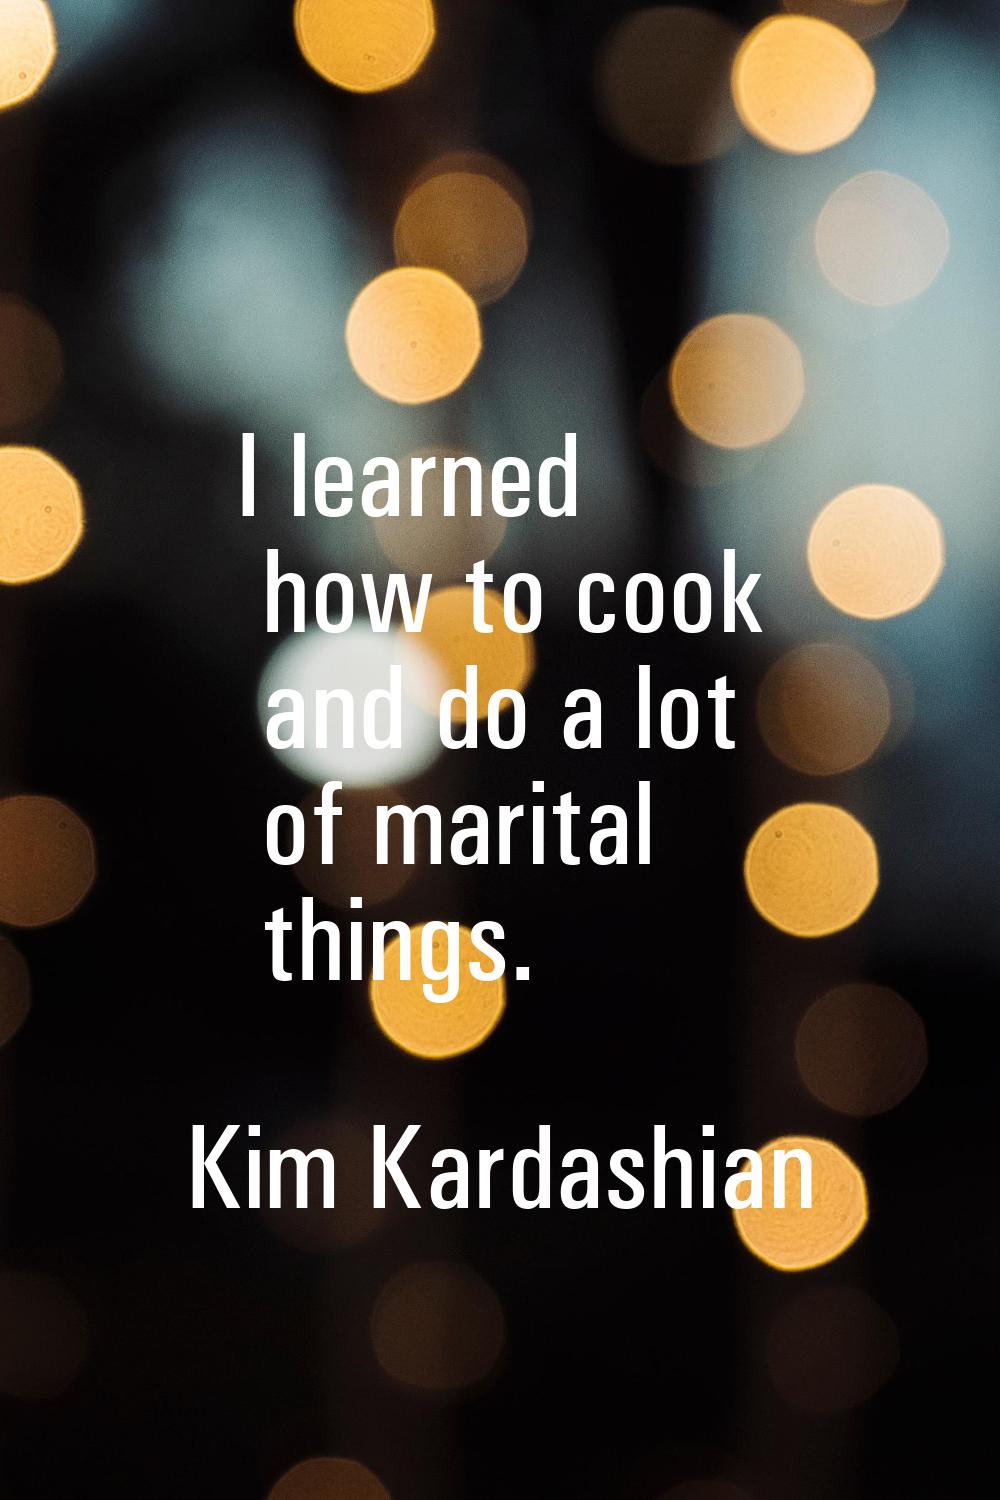 I learned how to cook and do a lot of marital things.